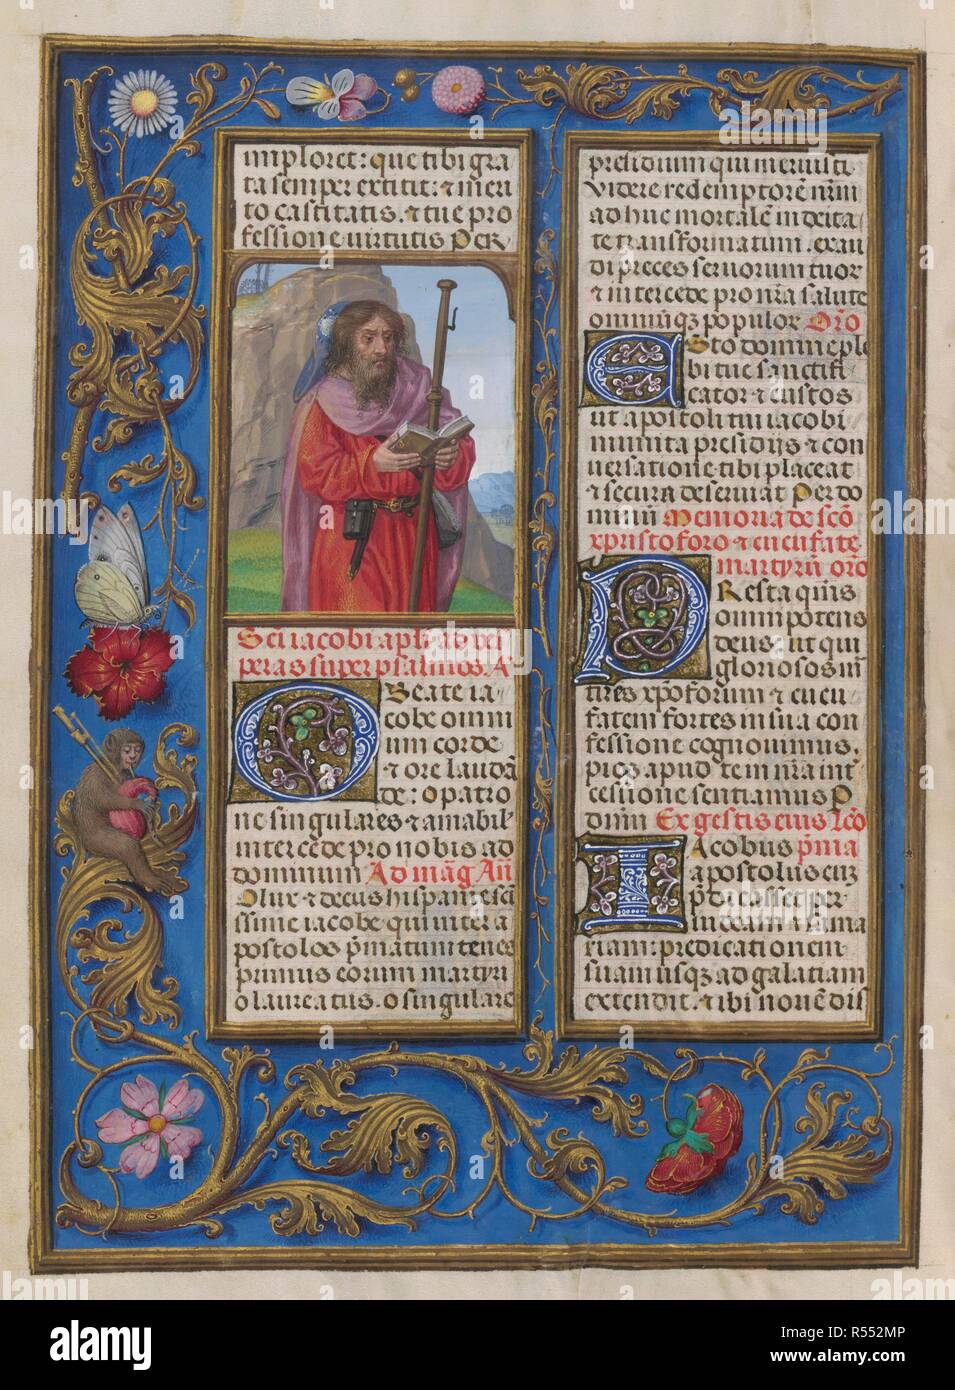 Sanctorale. Common of the Saints. St. James the Great. Floral border. Text and initials. Border containing flowers and insects. Isabella Breviary. Breviary, Use of the Dominicans ('The Breviary of Queen Isabella of Castile'). c1497. Source: Add. 18851 f.412v. Author: Master of James IV of Scotland. Stock Photo